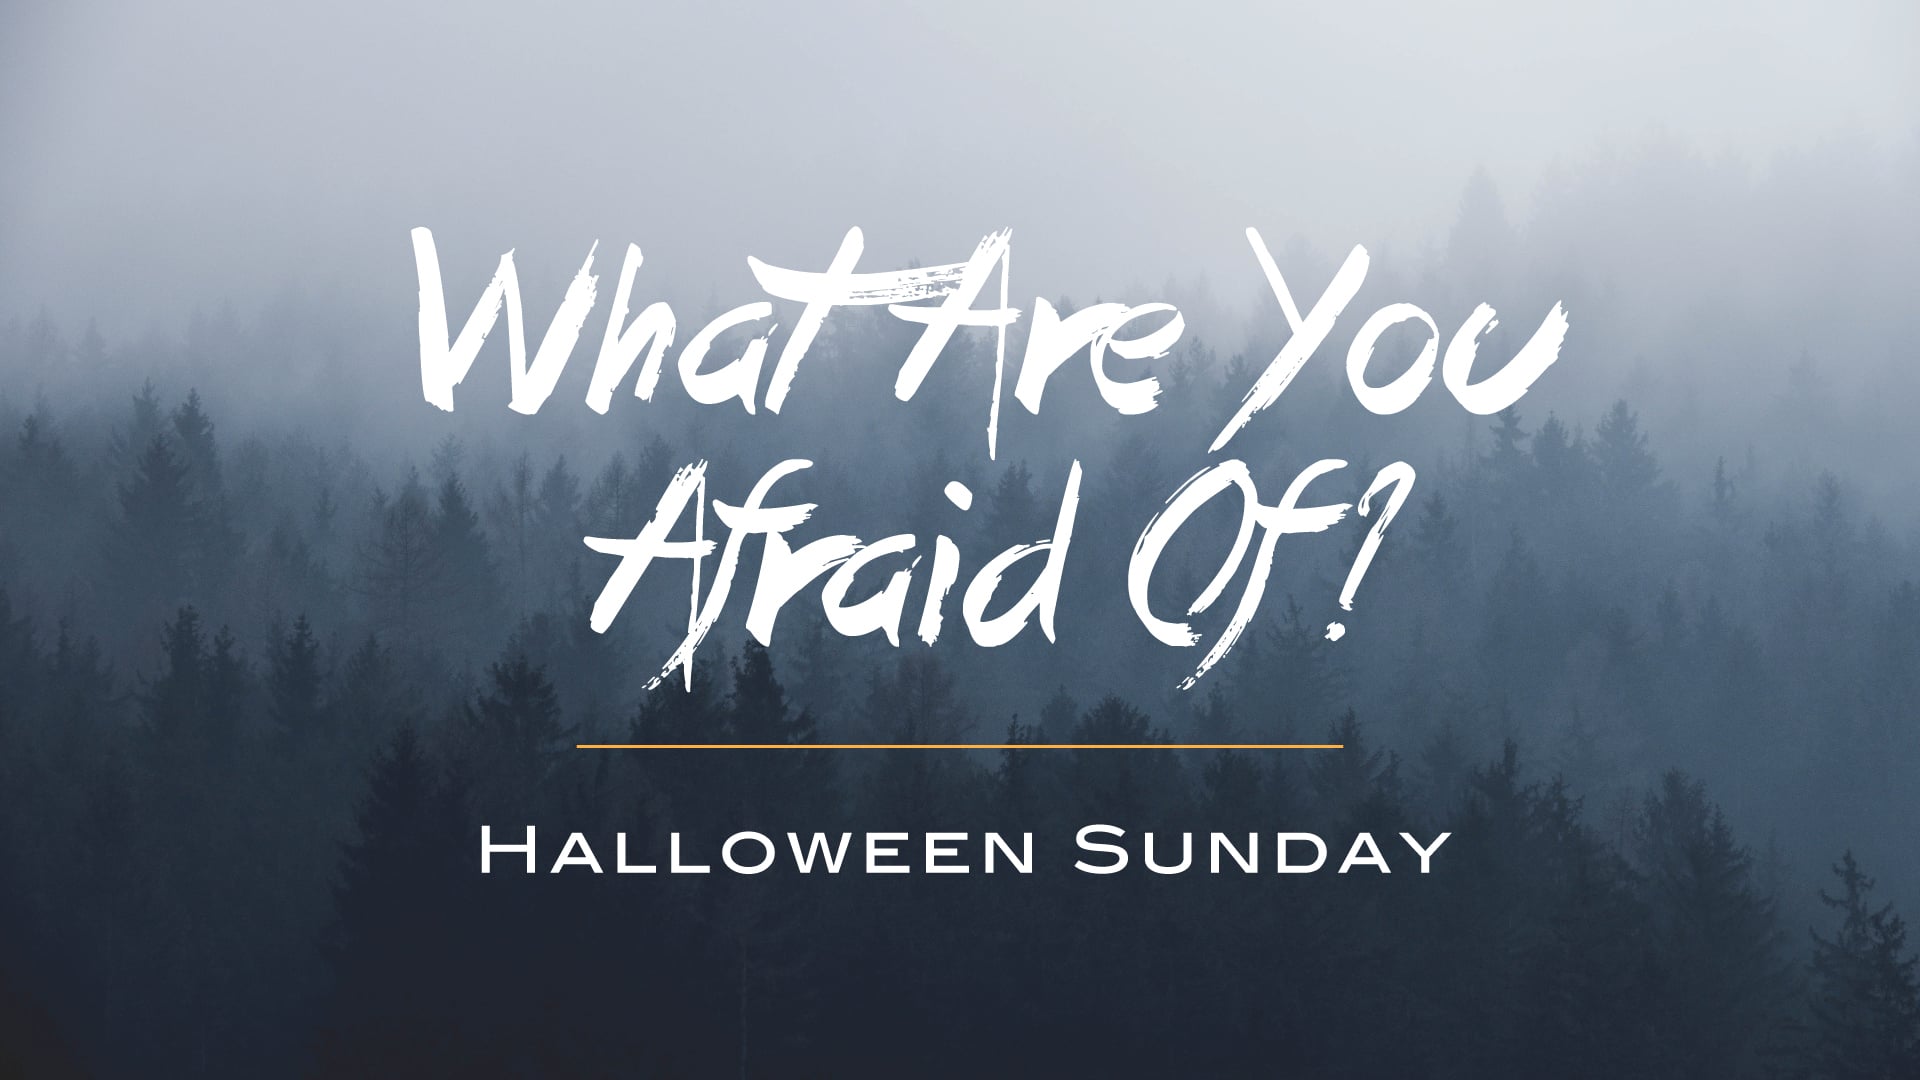 What Are You Afraid Of? Halloween Sunday